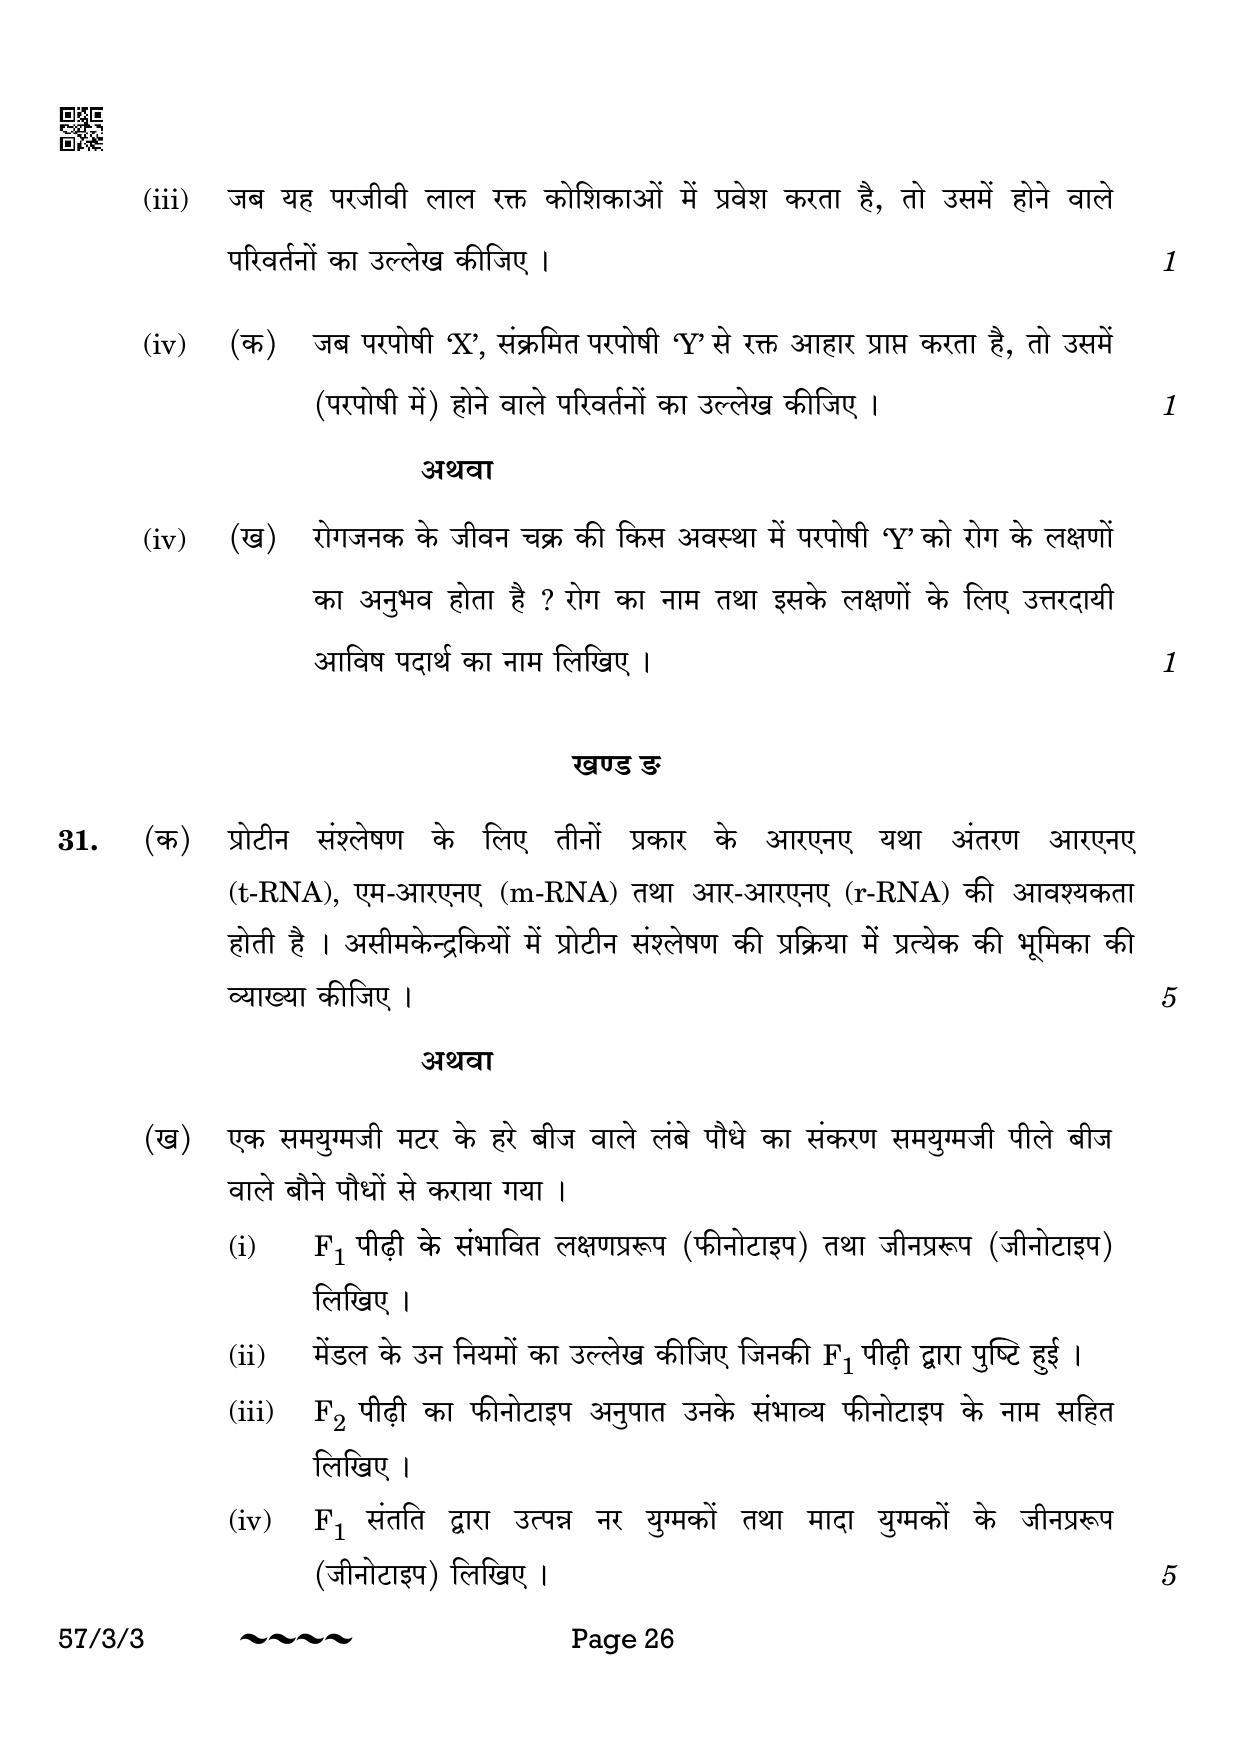 CBSE Class 12 57-3-3 Biology 2023 Question Paper - Page 26